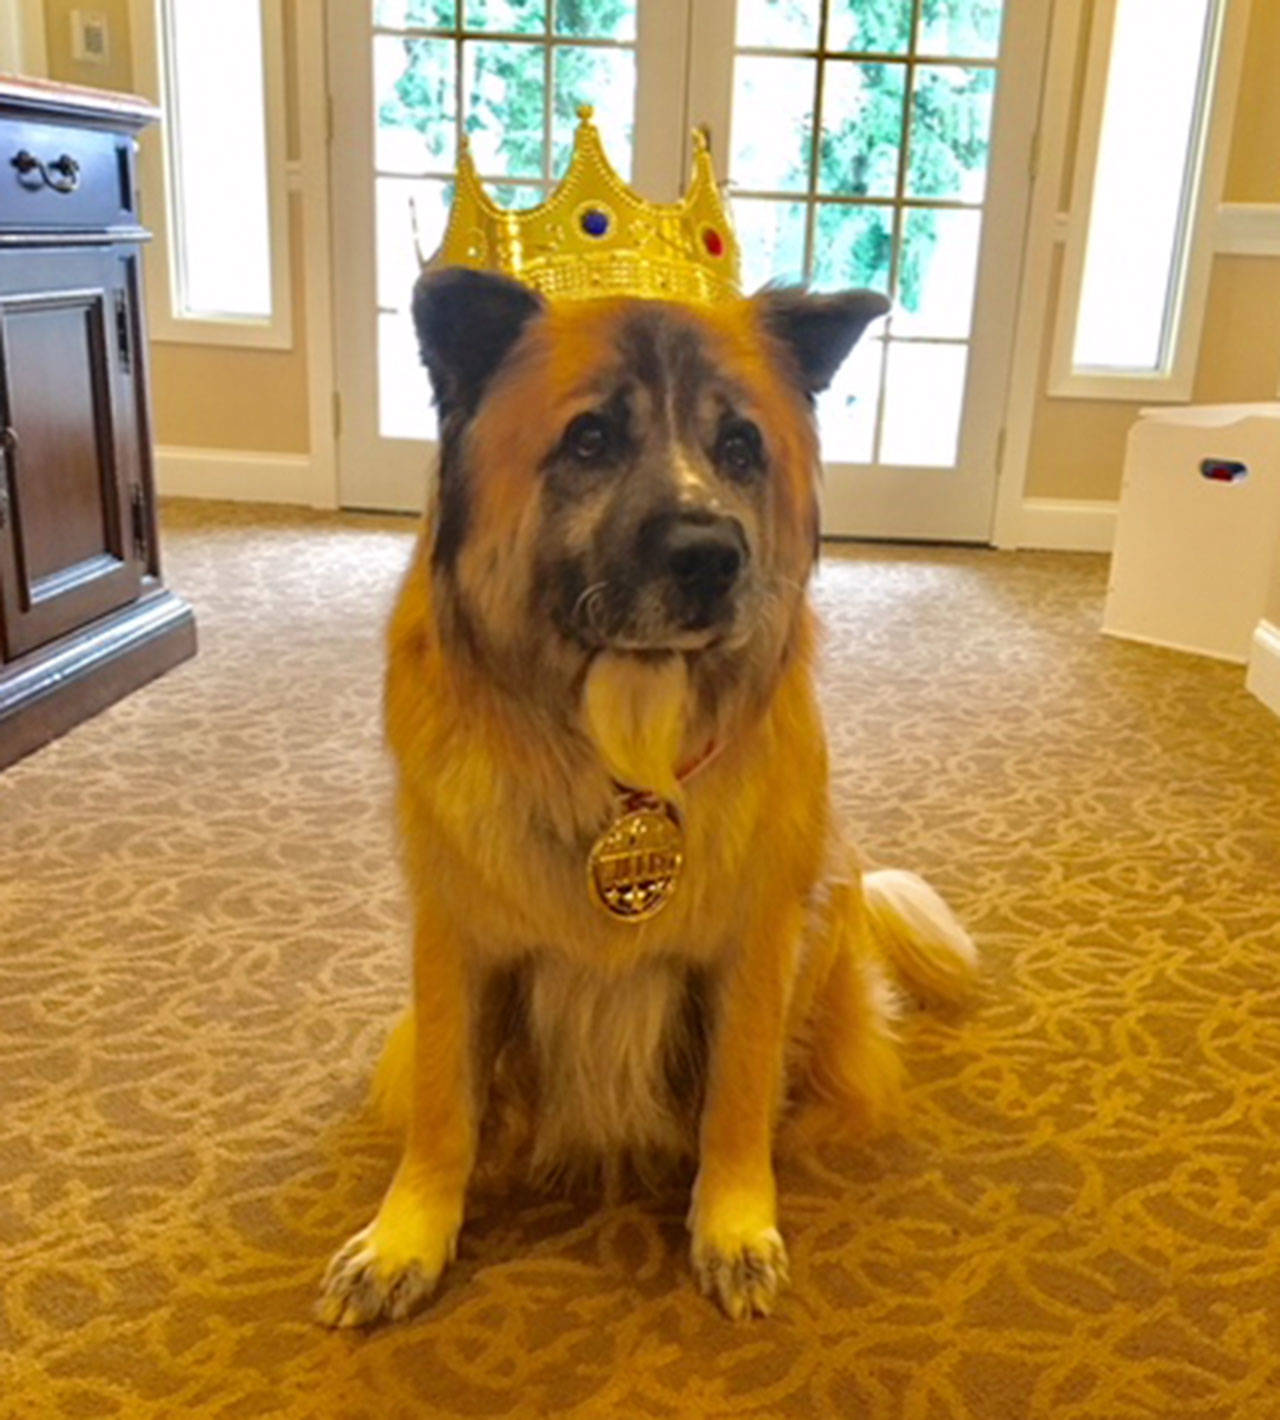 Moose, a St. Bernard, Chow, German Shepard mix who lives at Sunrise Mercer Island, won the community’s “Pet of the Year” contest. Photo courtesy of Marisa Mallett